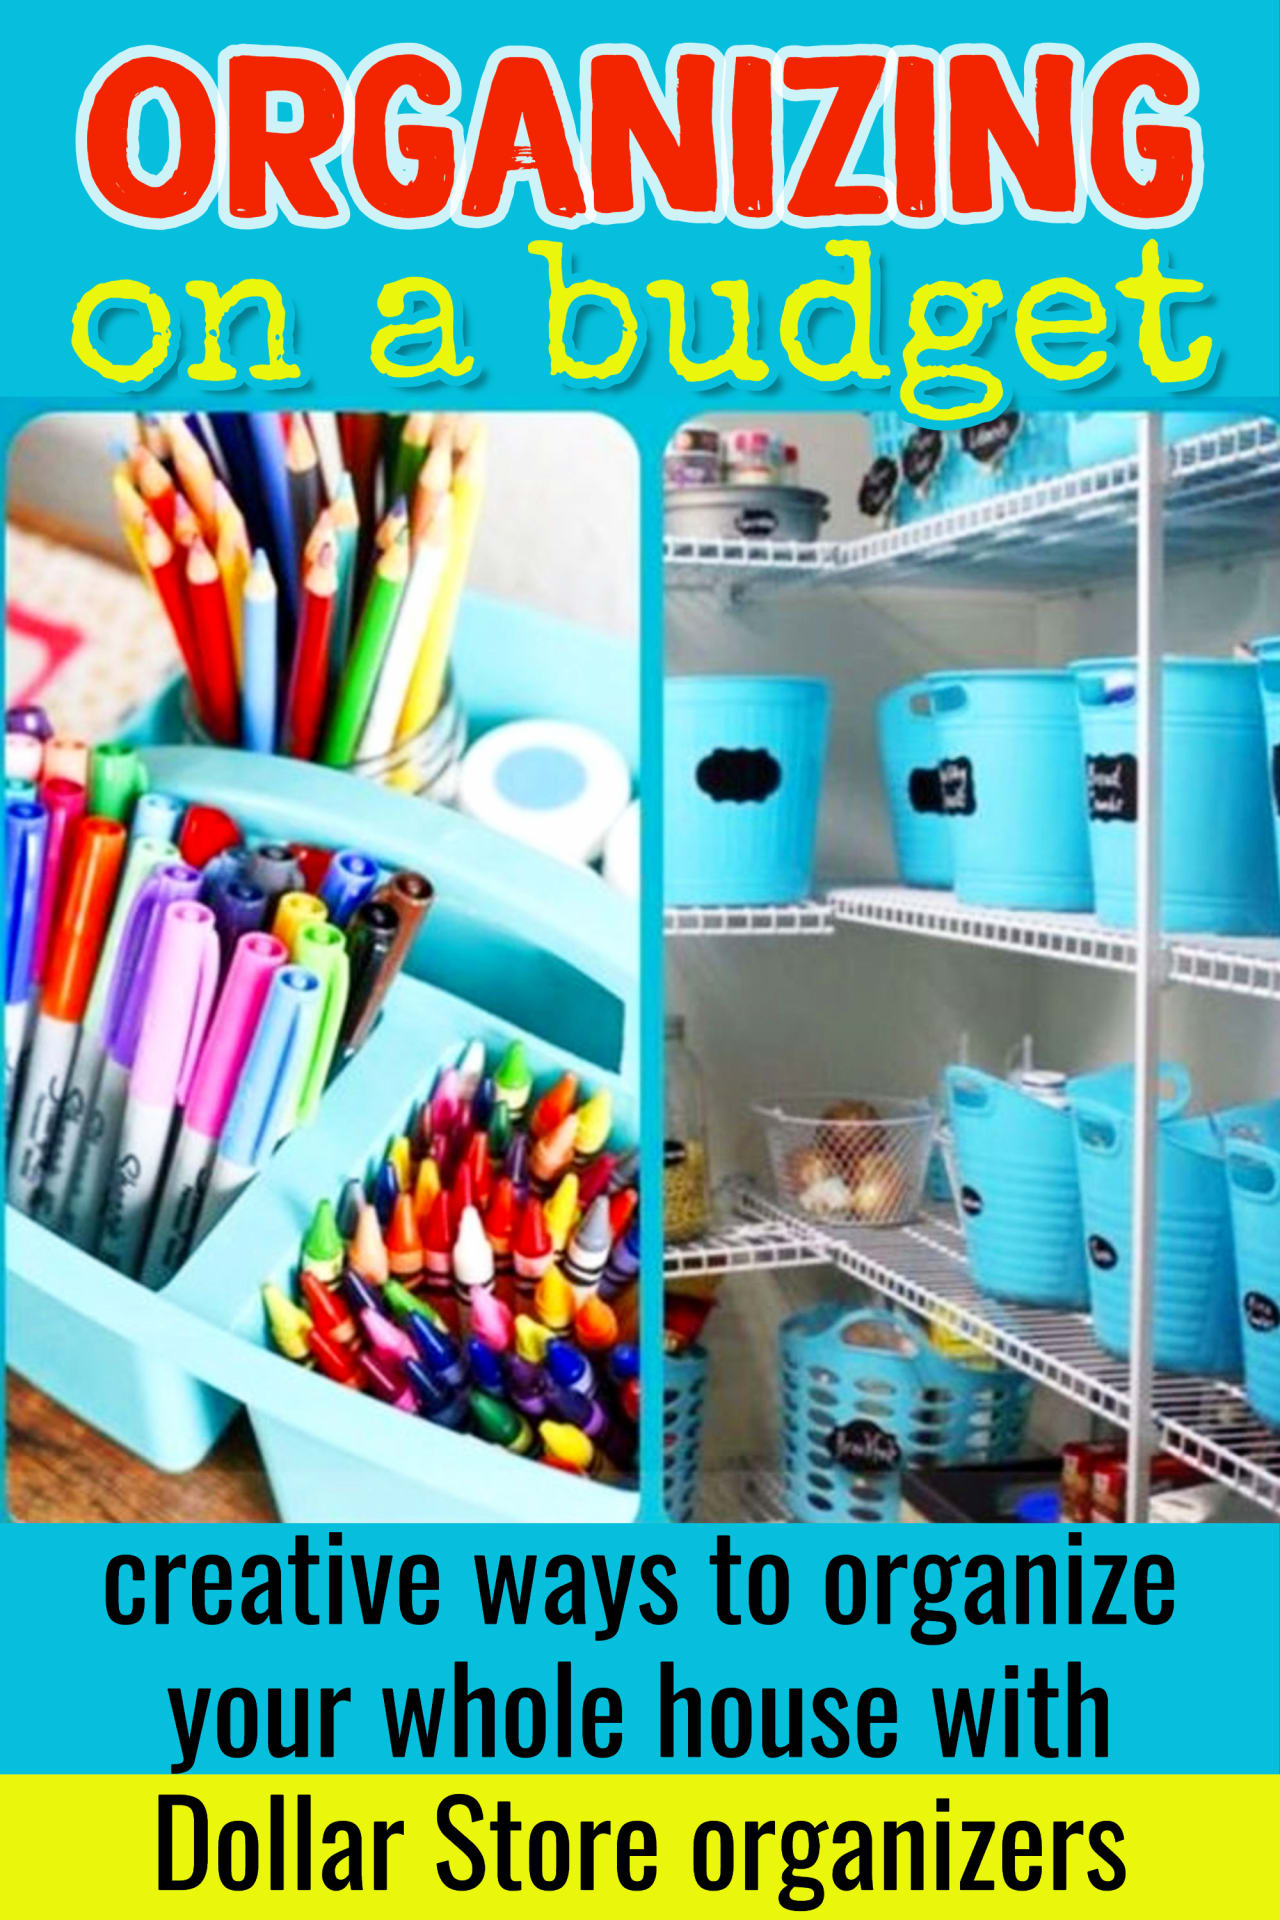 Dollar Store Organizing on a Budget